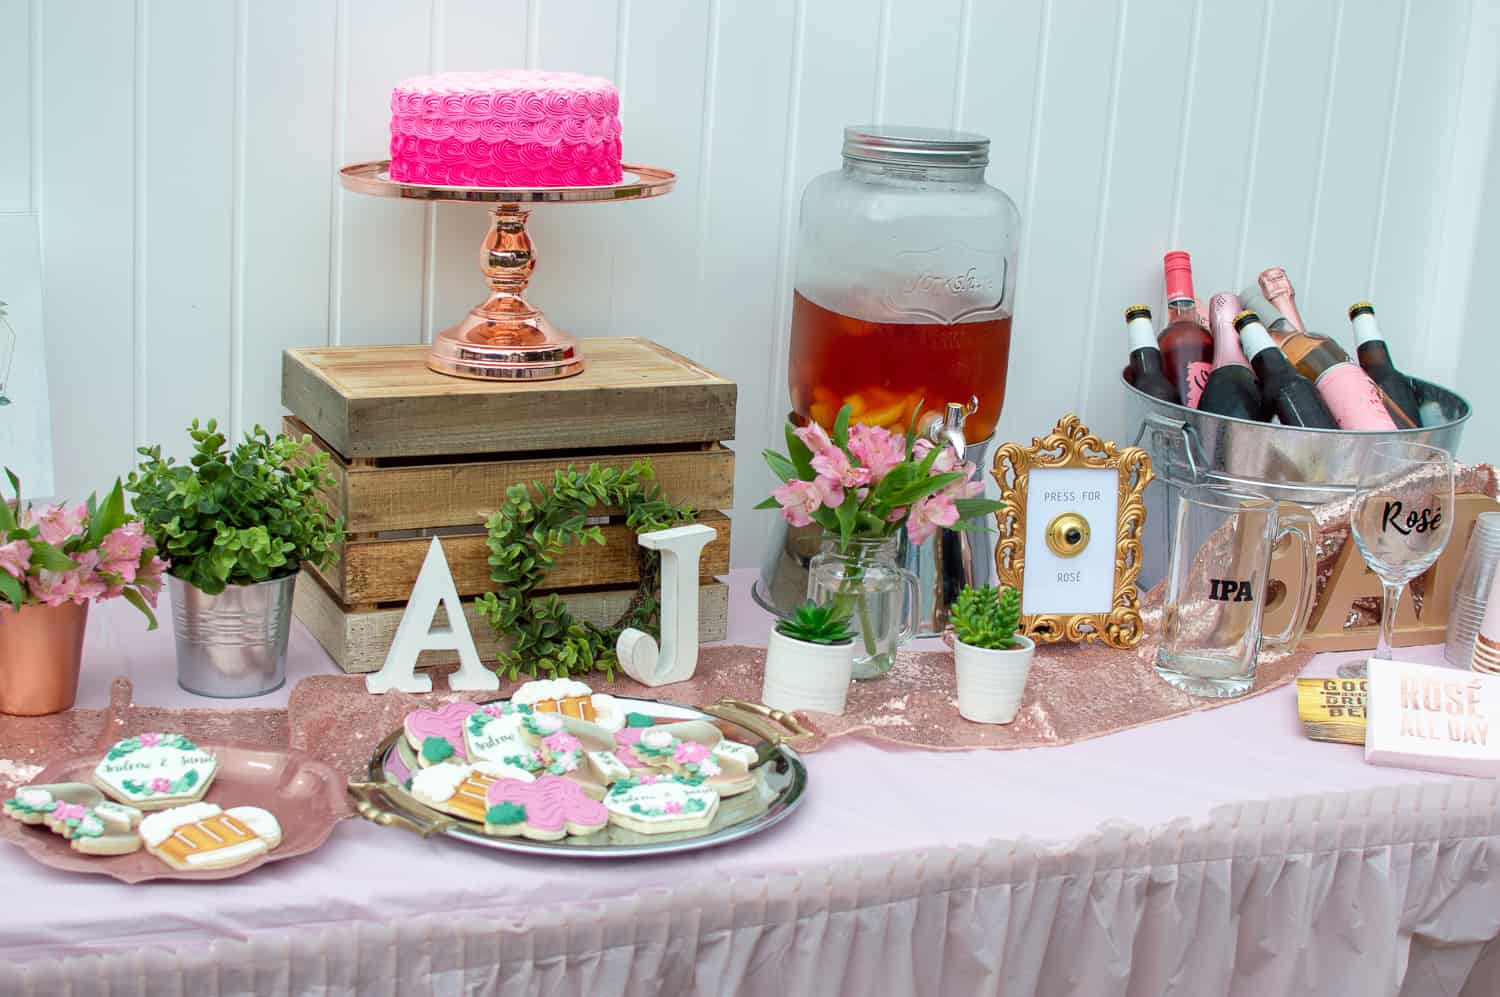 Rosé and IPA Wedding Shower Dessert and Drinks Table